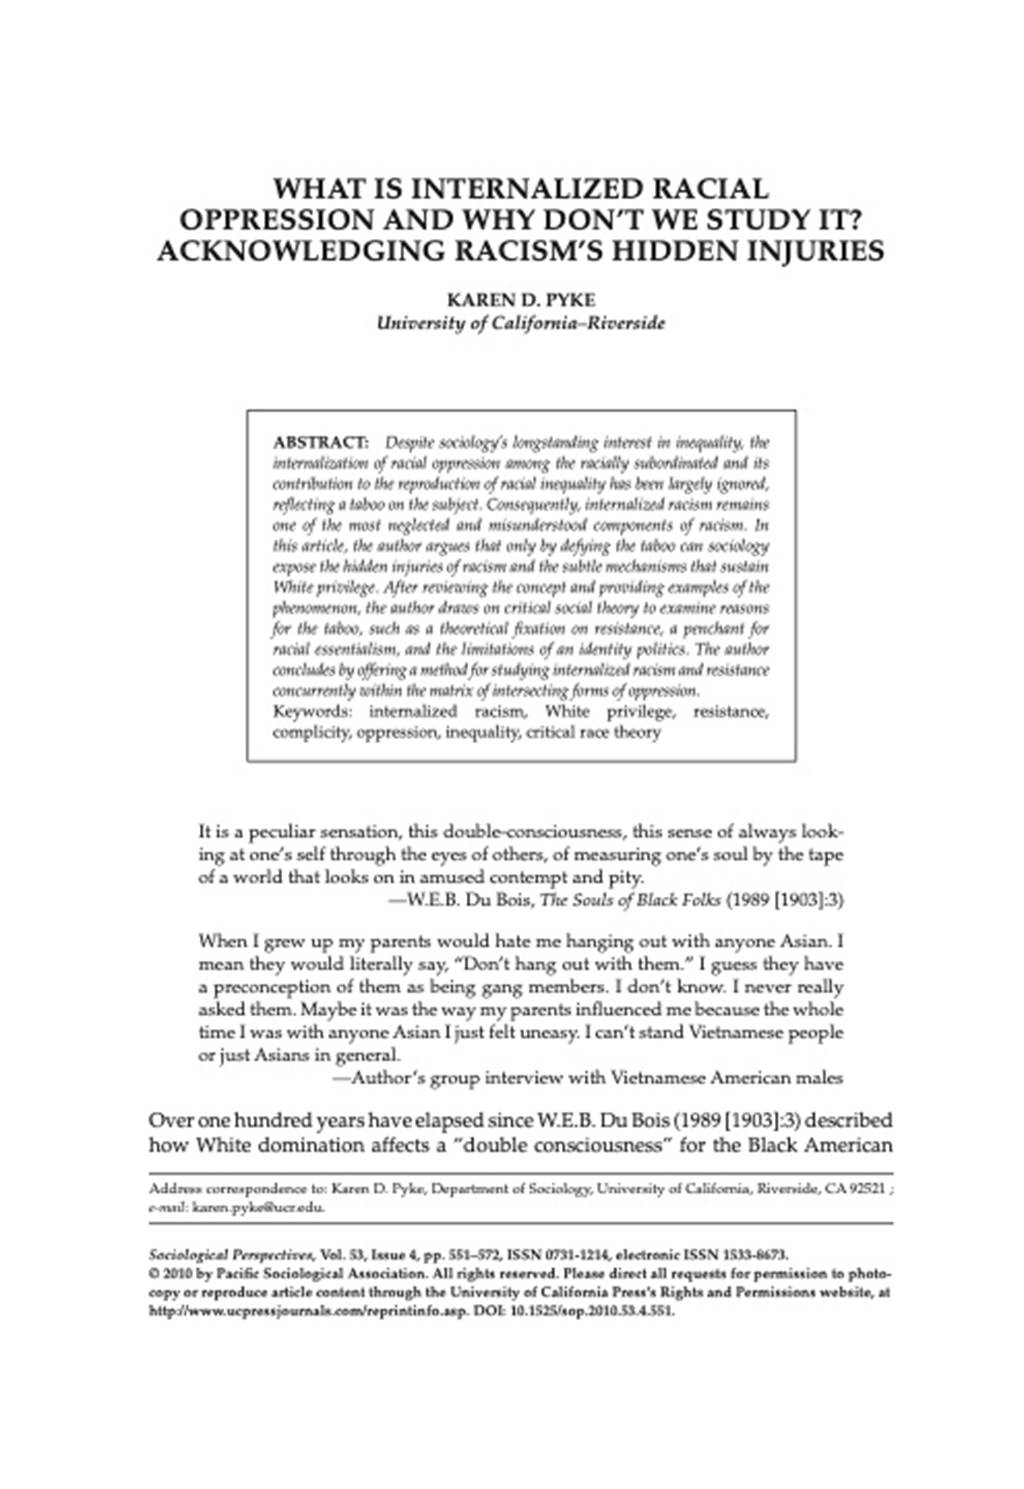 What is Internalized Racial Oppression and Why Don't We Study It? Acknowledging Racism's Hidden Injuries - image